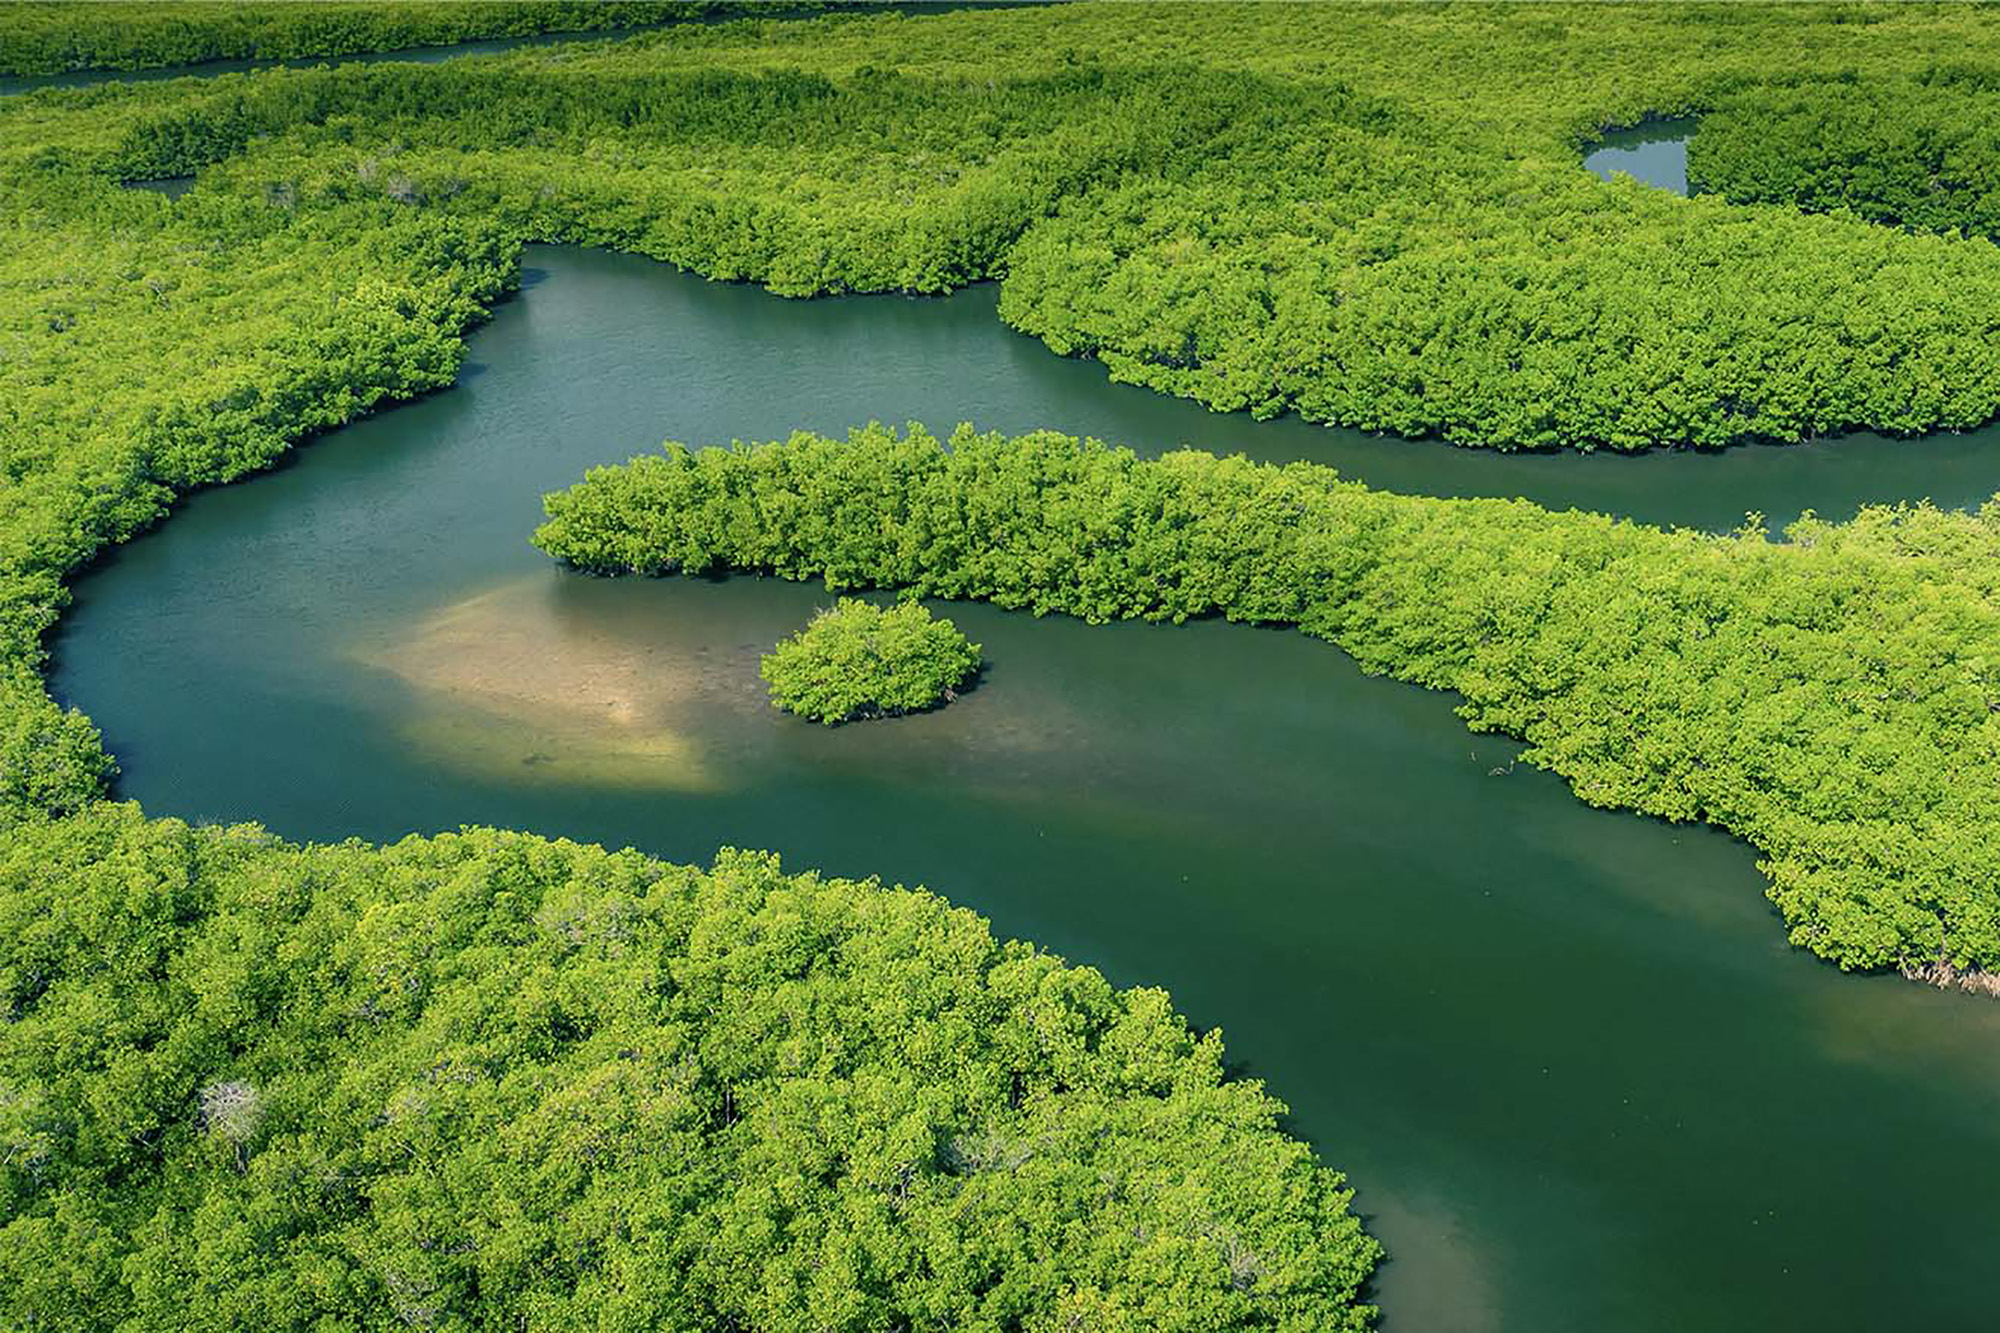 Bird's eye view of a green forest in the Amazon rainforest